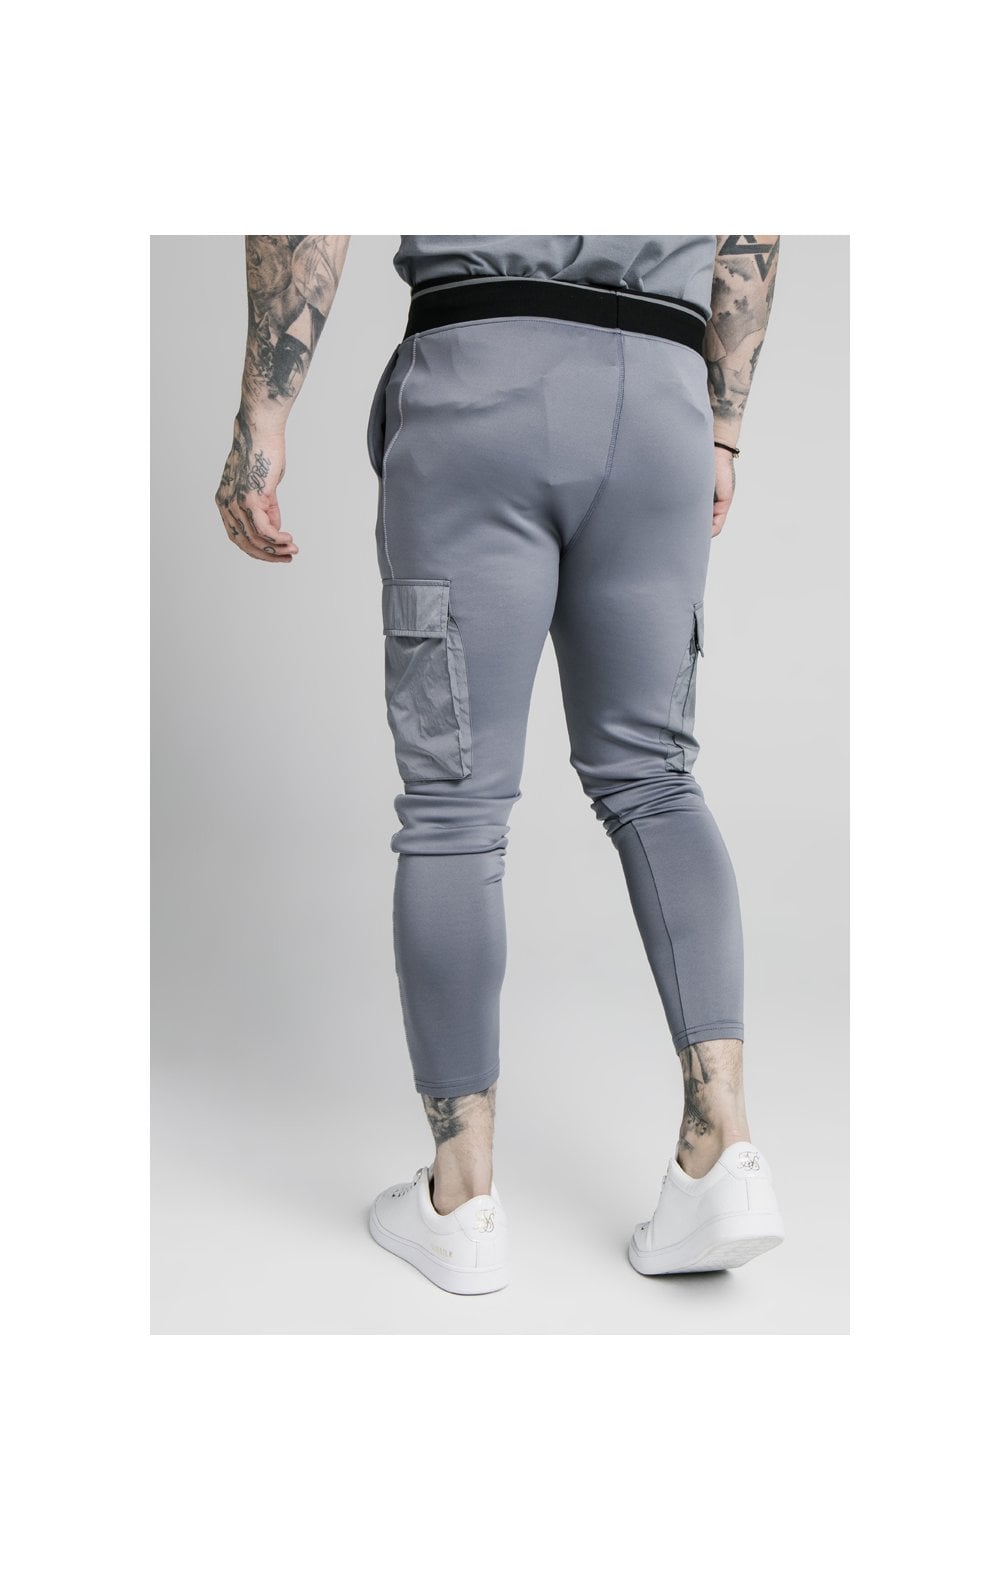 Load image into Gallery viewer, SikSilk Adapt Crushed Nylon Cargo Pant - Blue Slate (1)